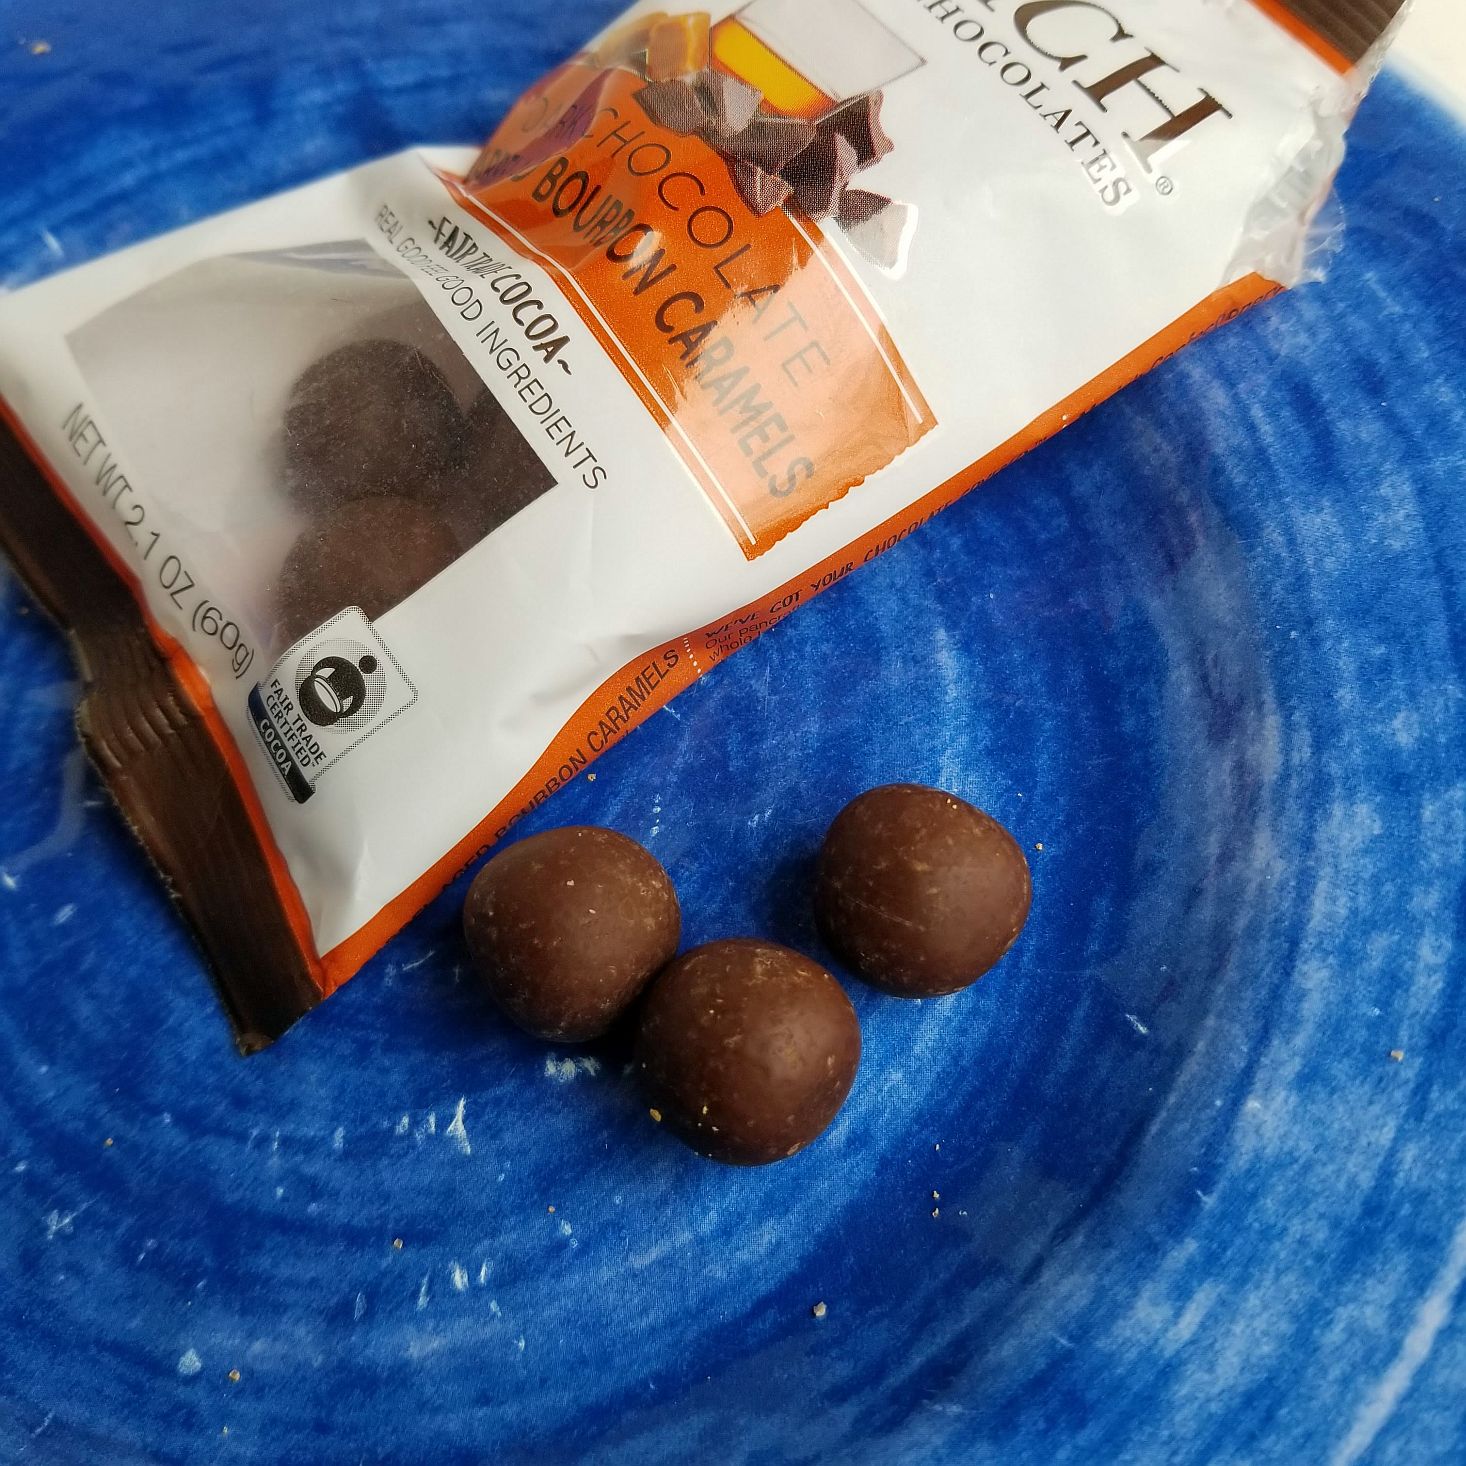 Snack Nation March 2020 chocolate truffles close